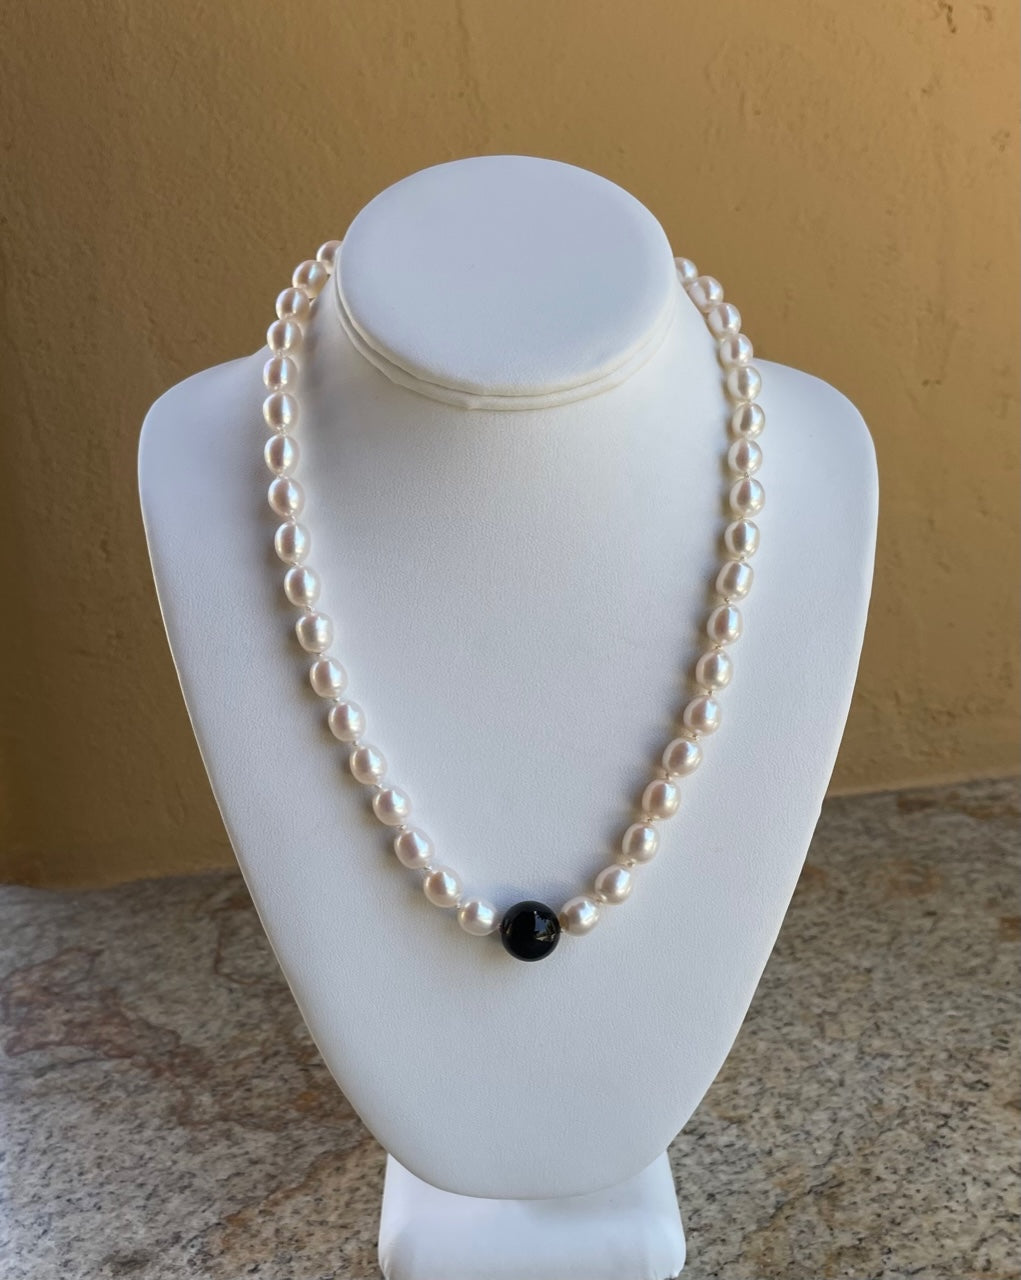 Necklace - Knotted white rice pearls with black onyx as a focal point